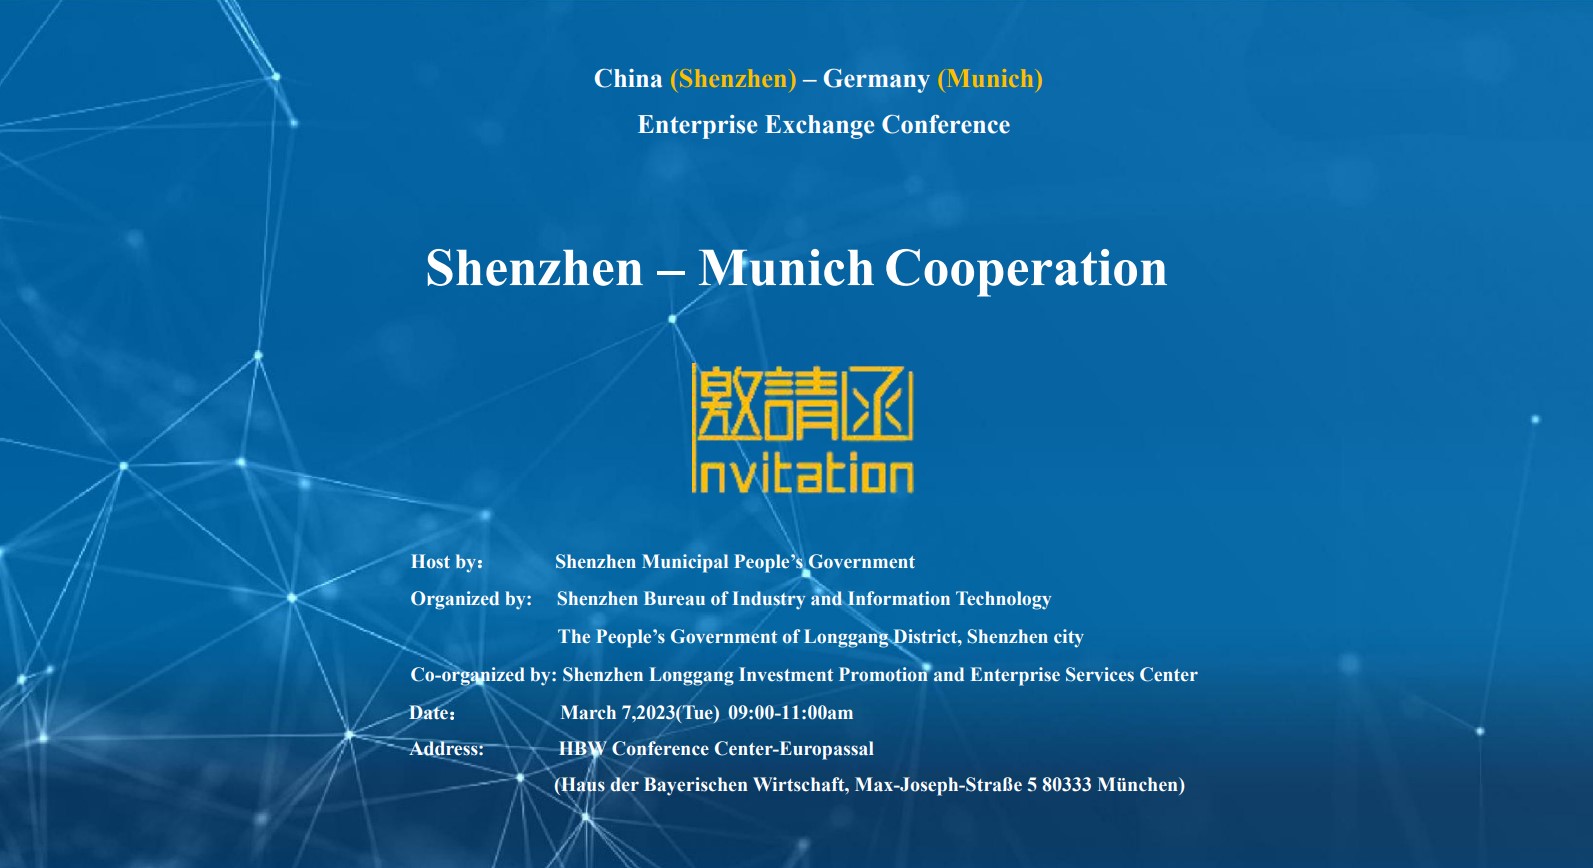 Media Scope Group to join China-Germany Enterprise Exchange Conference